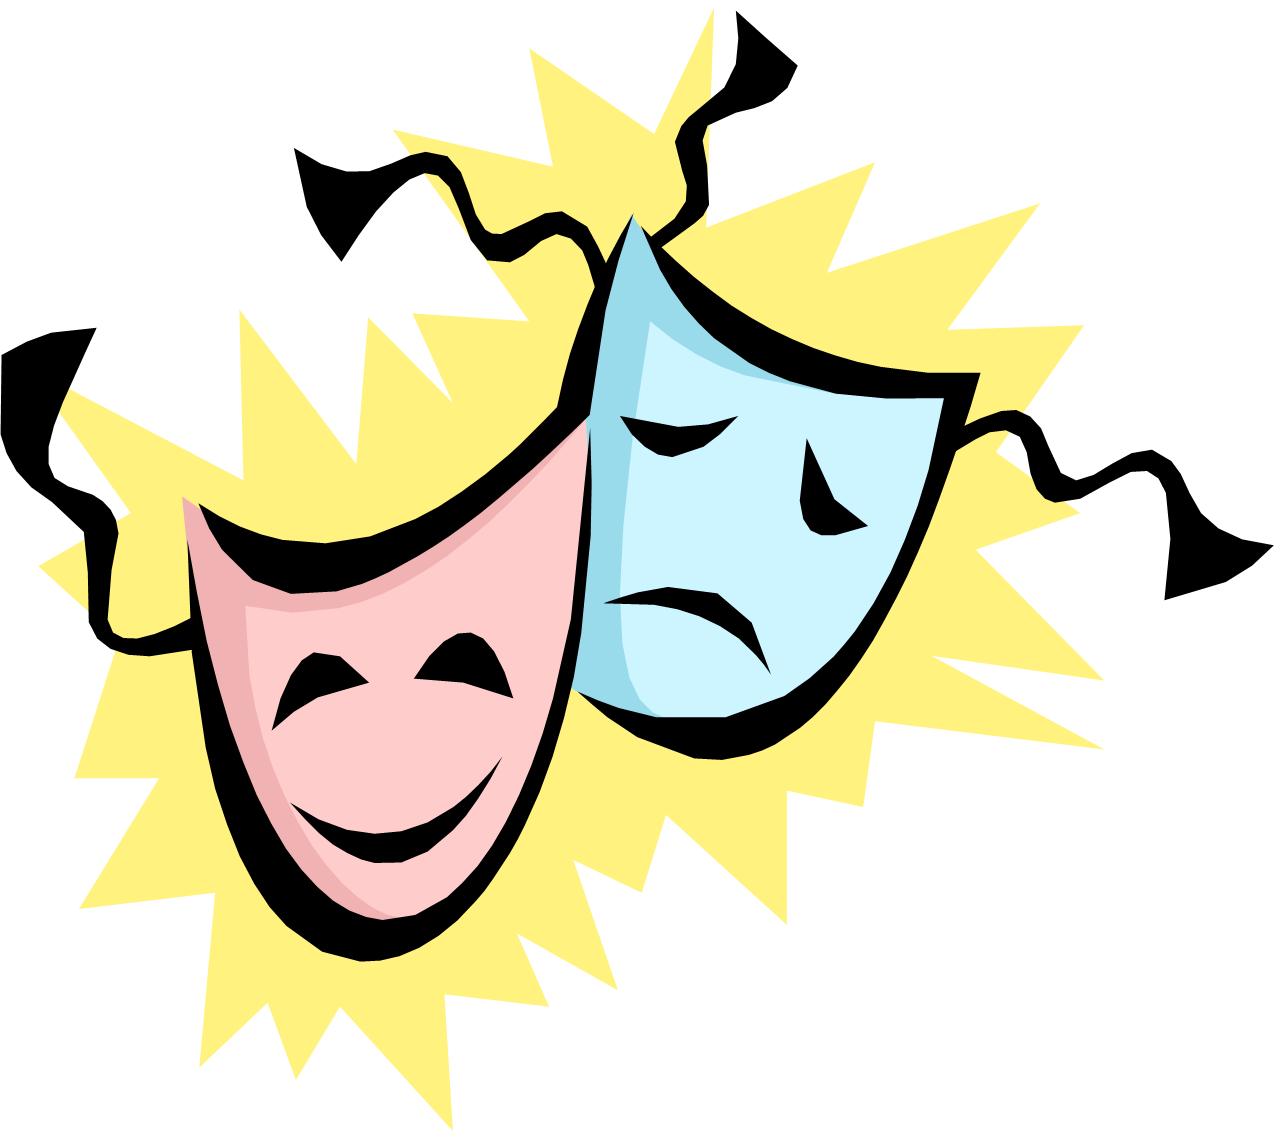 Pictures Of Theatre Masks - ClipArt Best